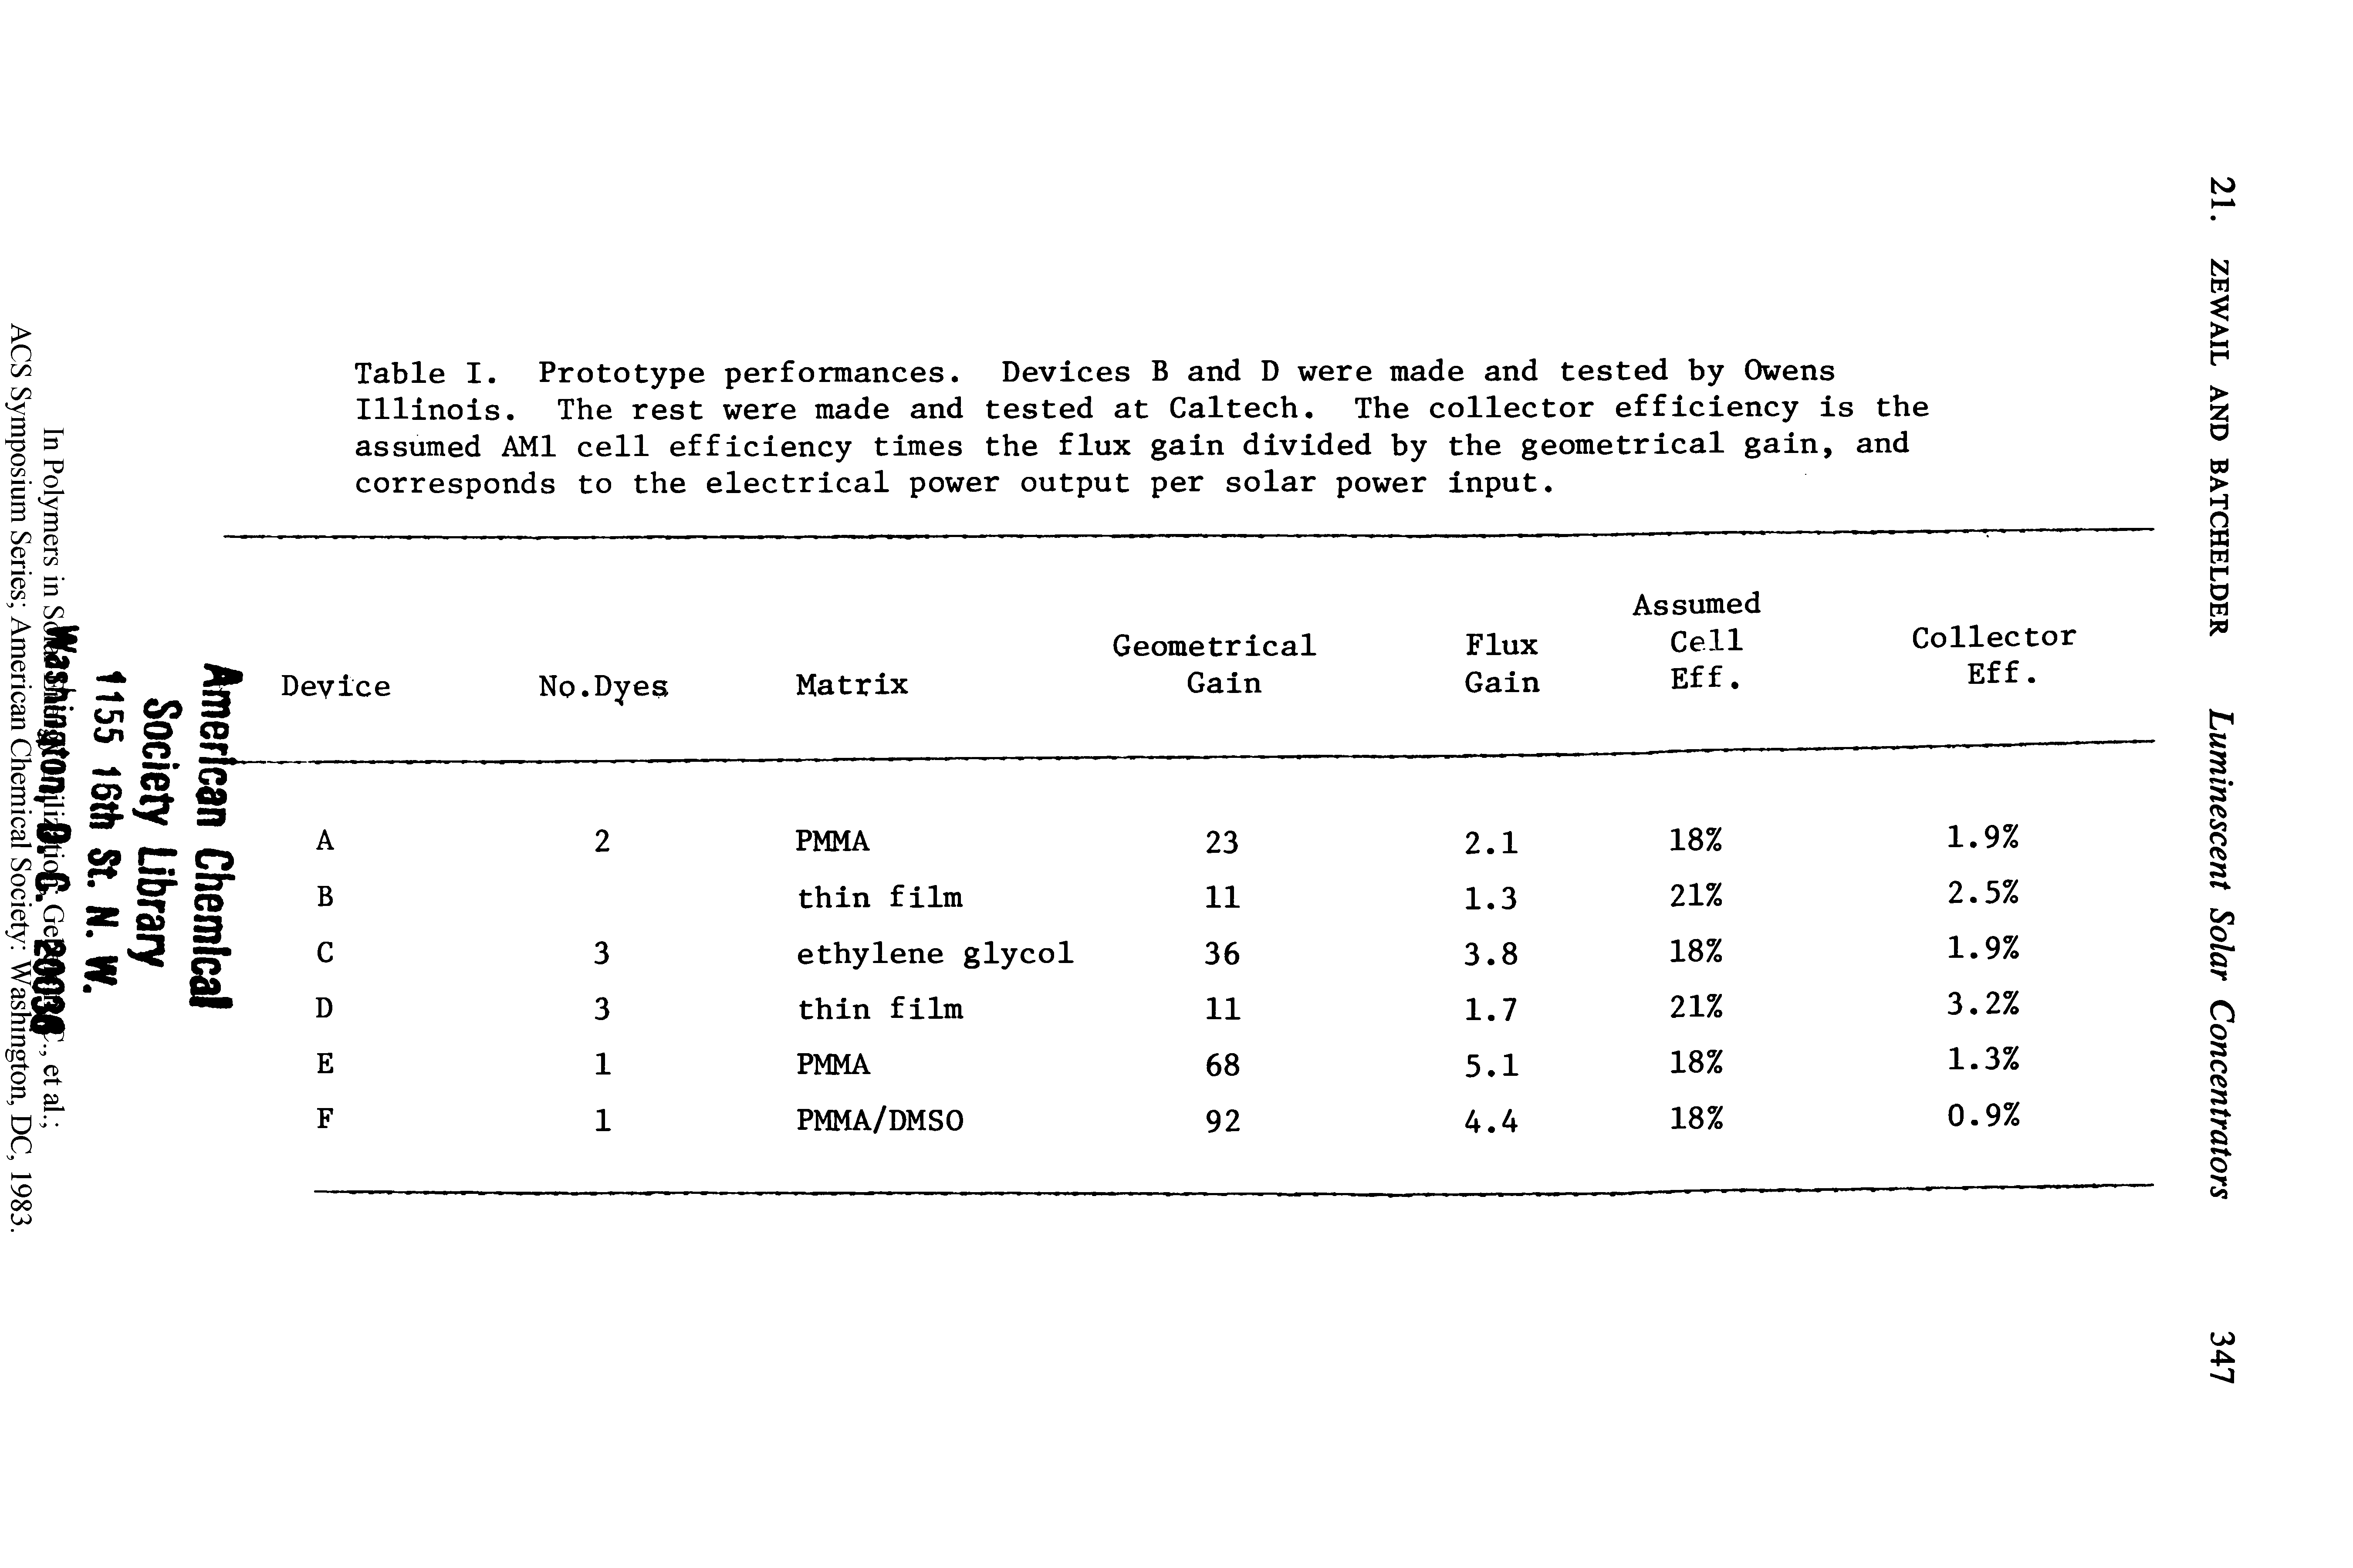 Table I. Prototype performances. Devices B and D were made and tested by Owens Illinois. The rest were made and tested at Caltech. The collector efficiency is the assumed AMI cell efficiency times the flux gain divided by the geometrical gain, and corresponds to the electrical power output per solar power input.